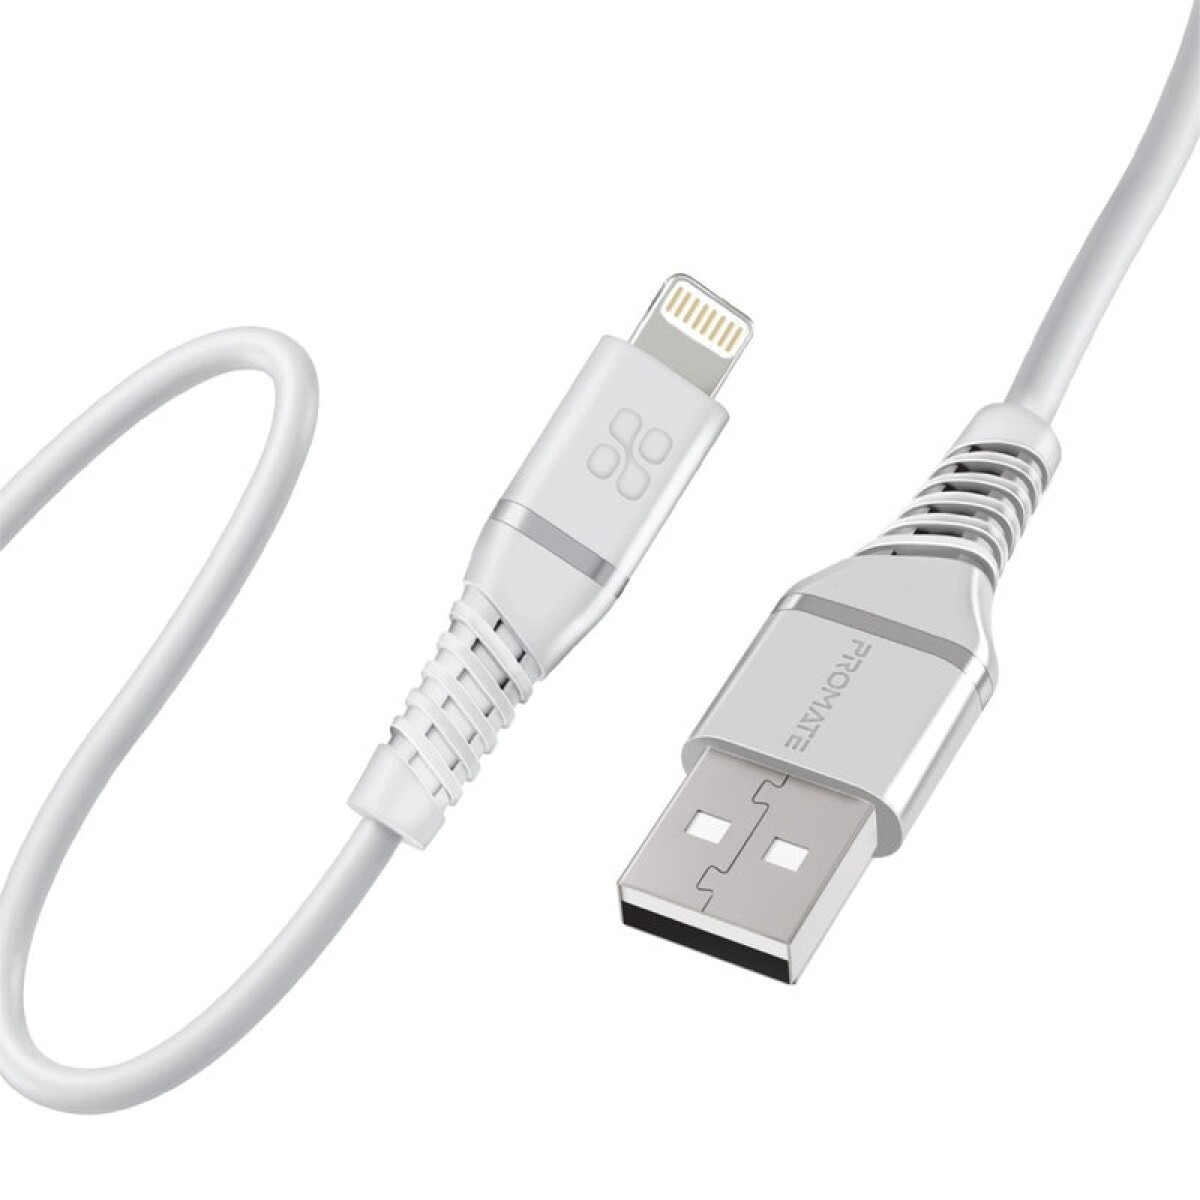 PROMATE POWERLINE-AI120.WHITE CABLE USB A LIGHTNING 1.2M MFI - Promate Powerline-ai120.white Cable Usb A Lightning 1.2m Mfi 